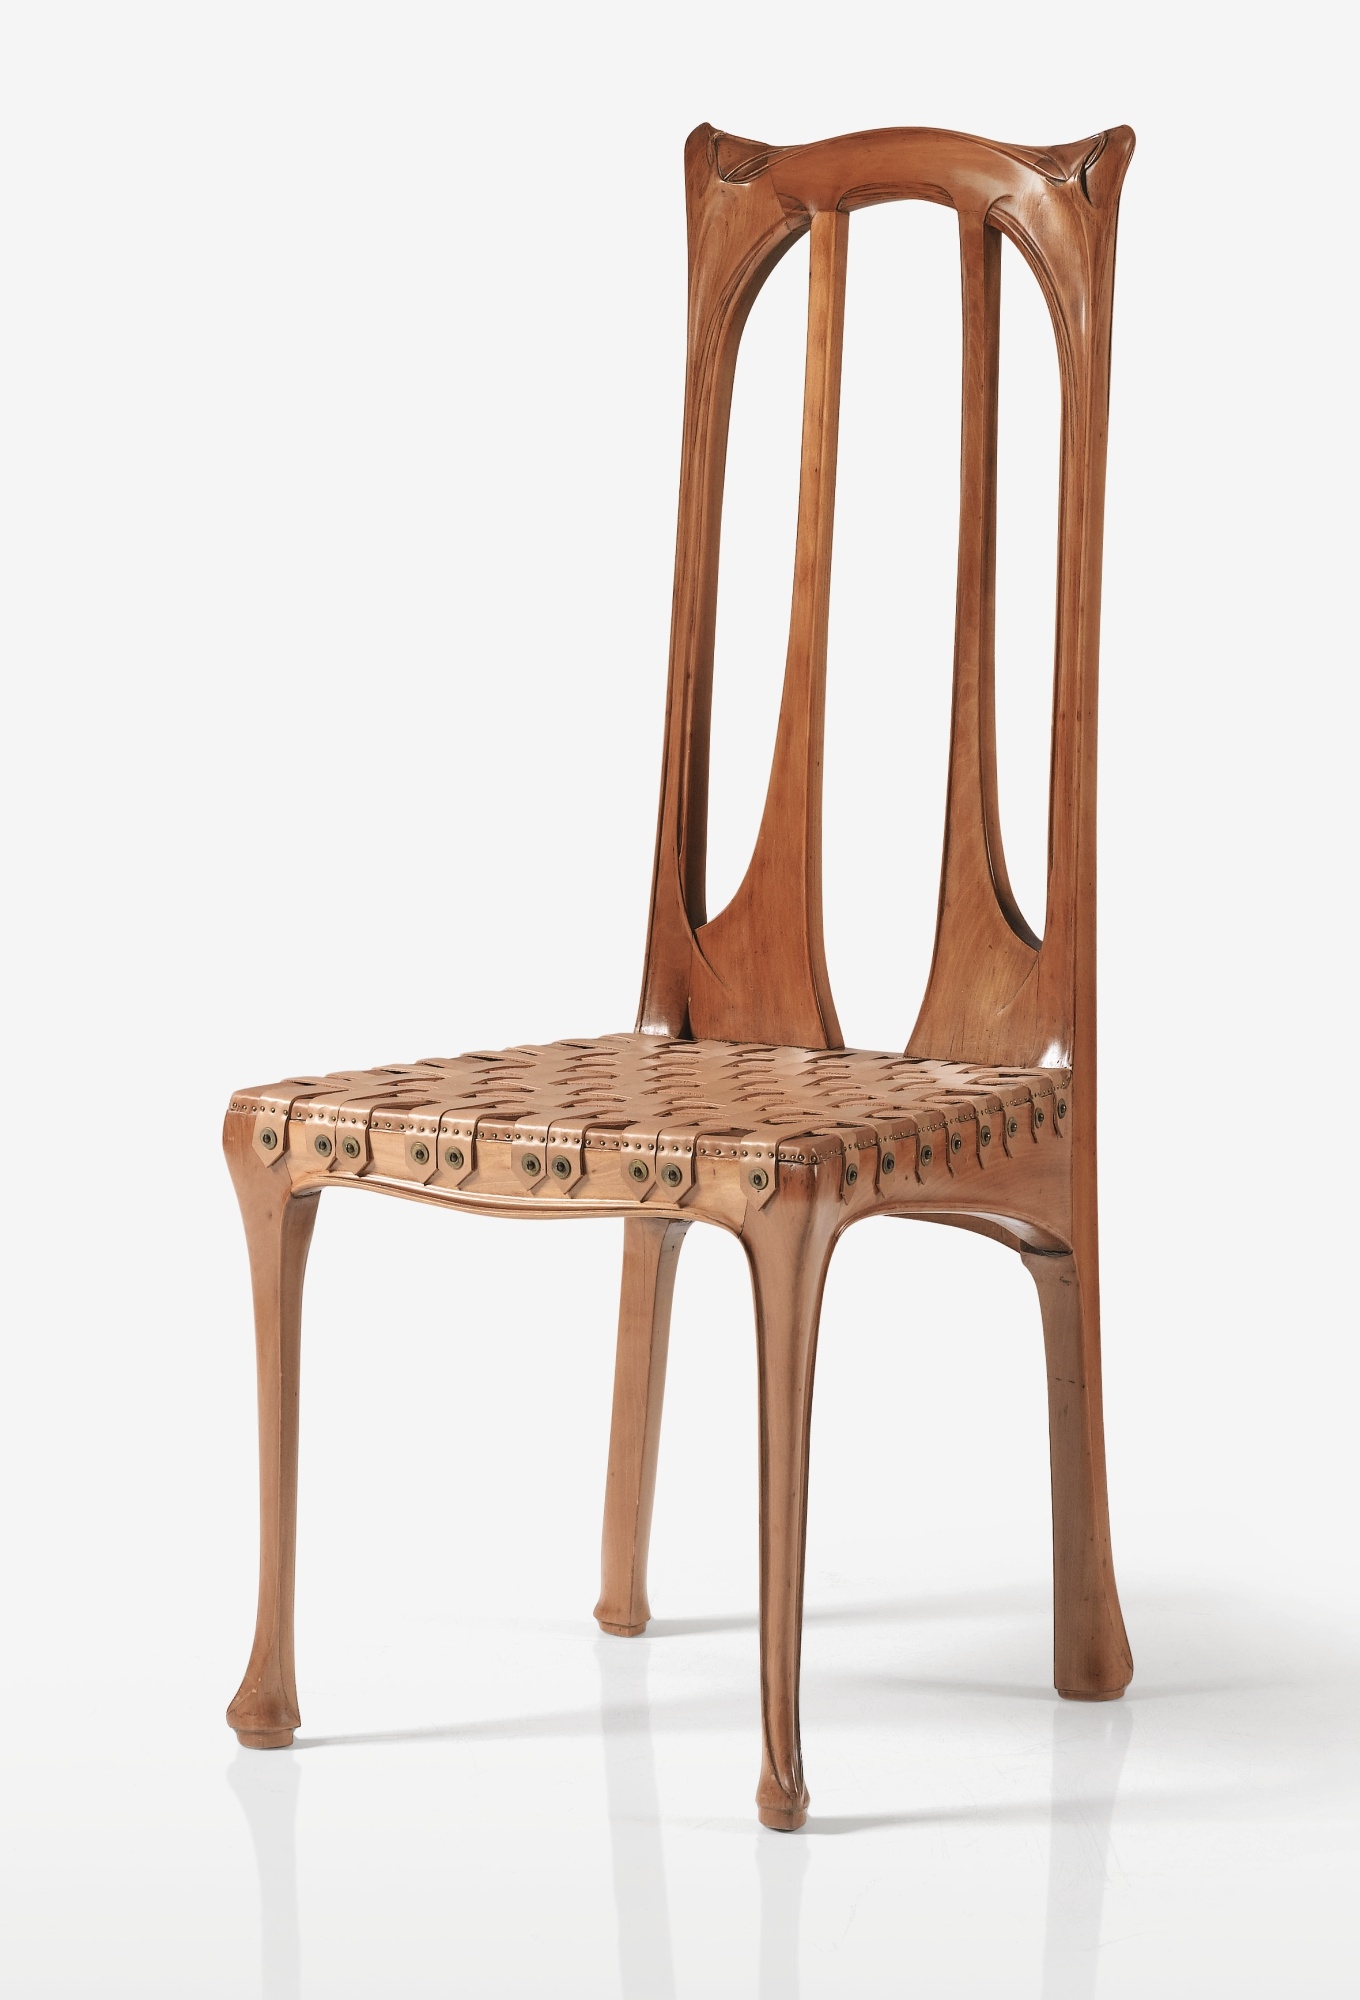 CHAIR by Hector Guimard, circa 1900